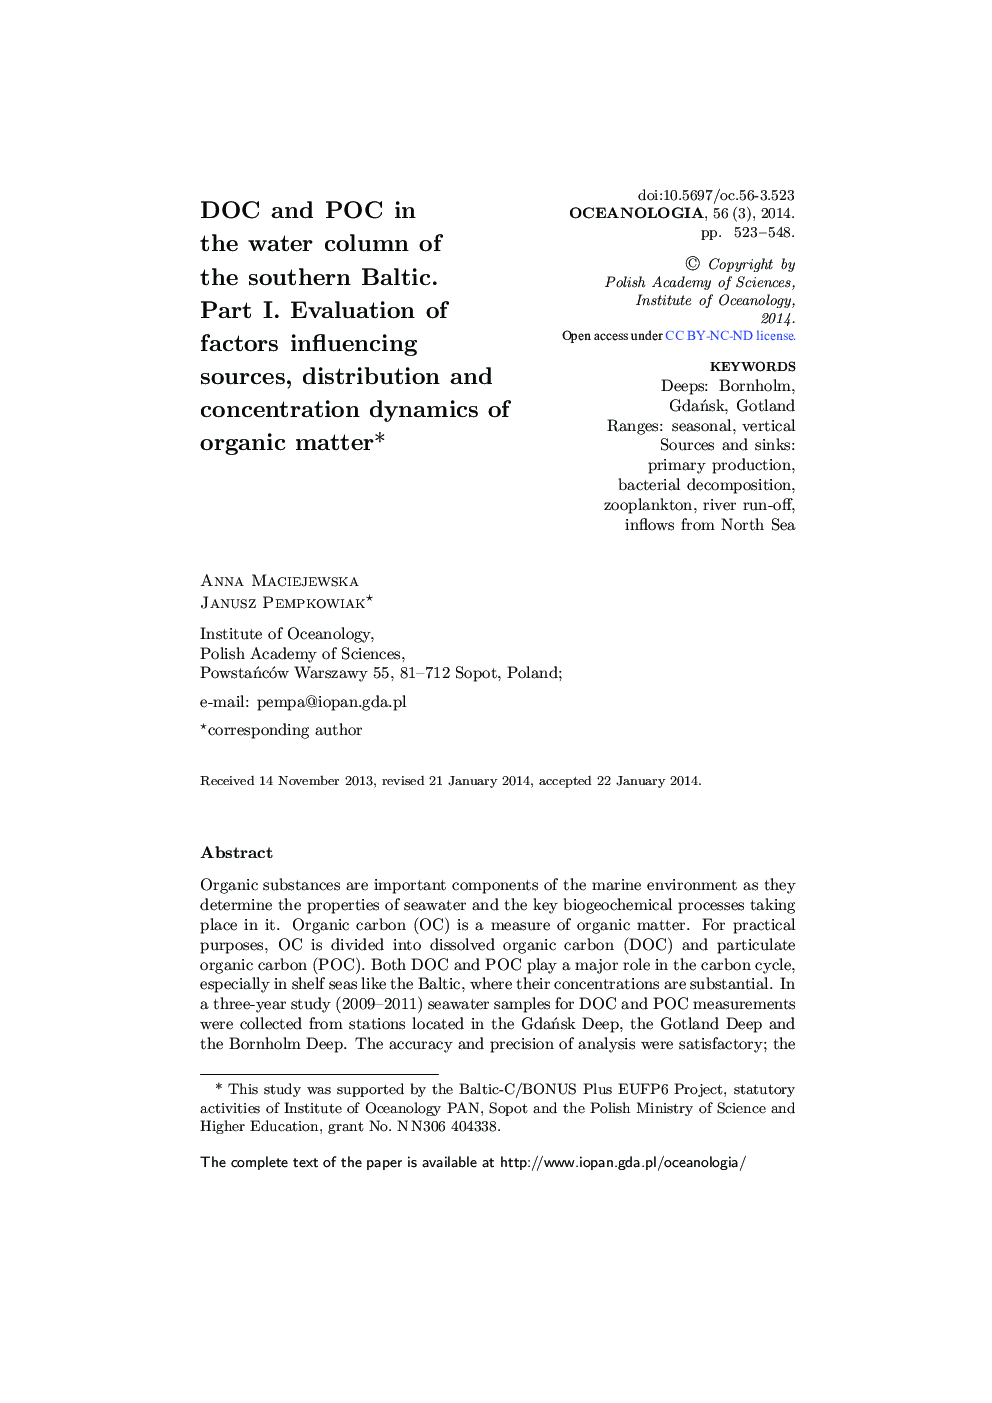 DOC and POC in the water column of the southern Baltic. Part I. Evaluation of factors influencing sources, distribution and concentration dynamics of organic matter* 